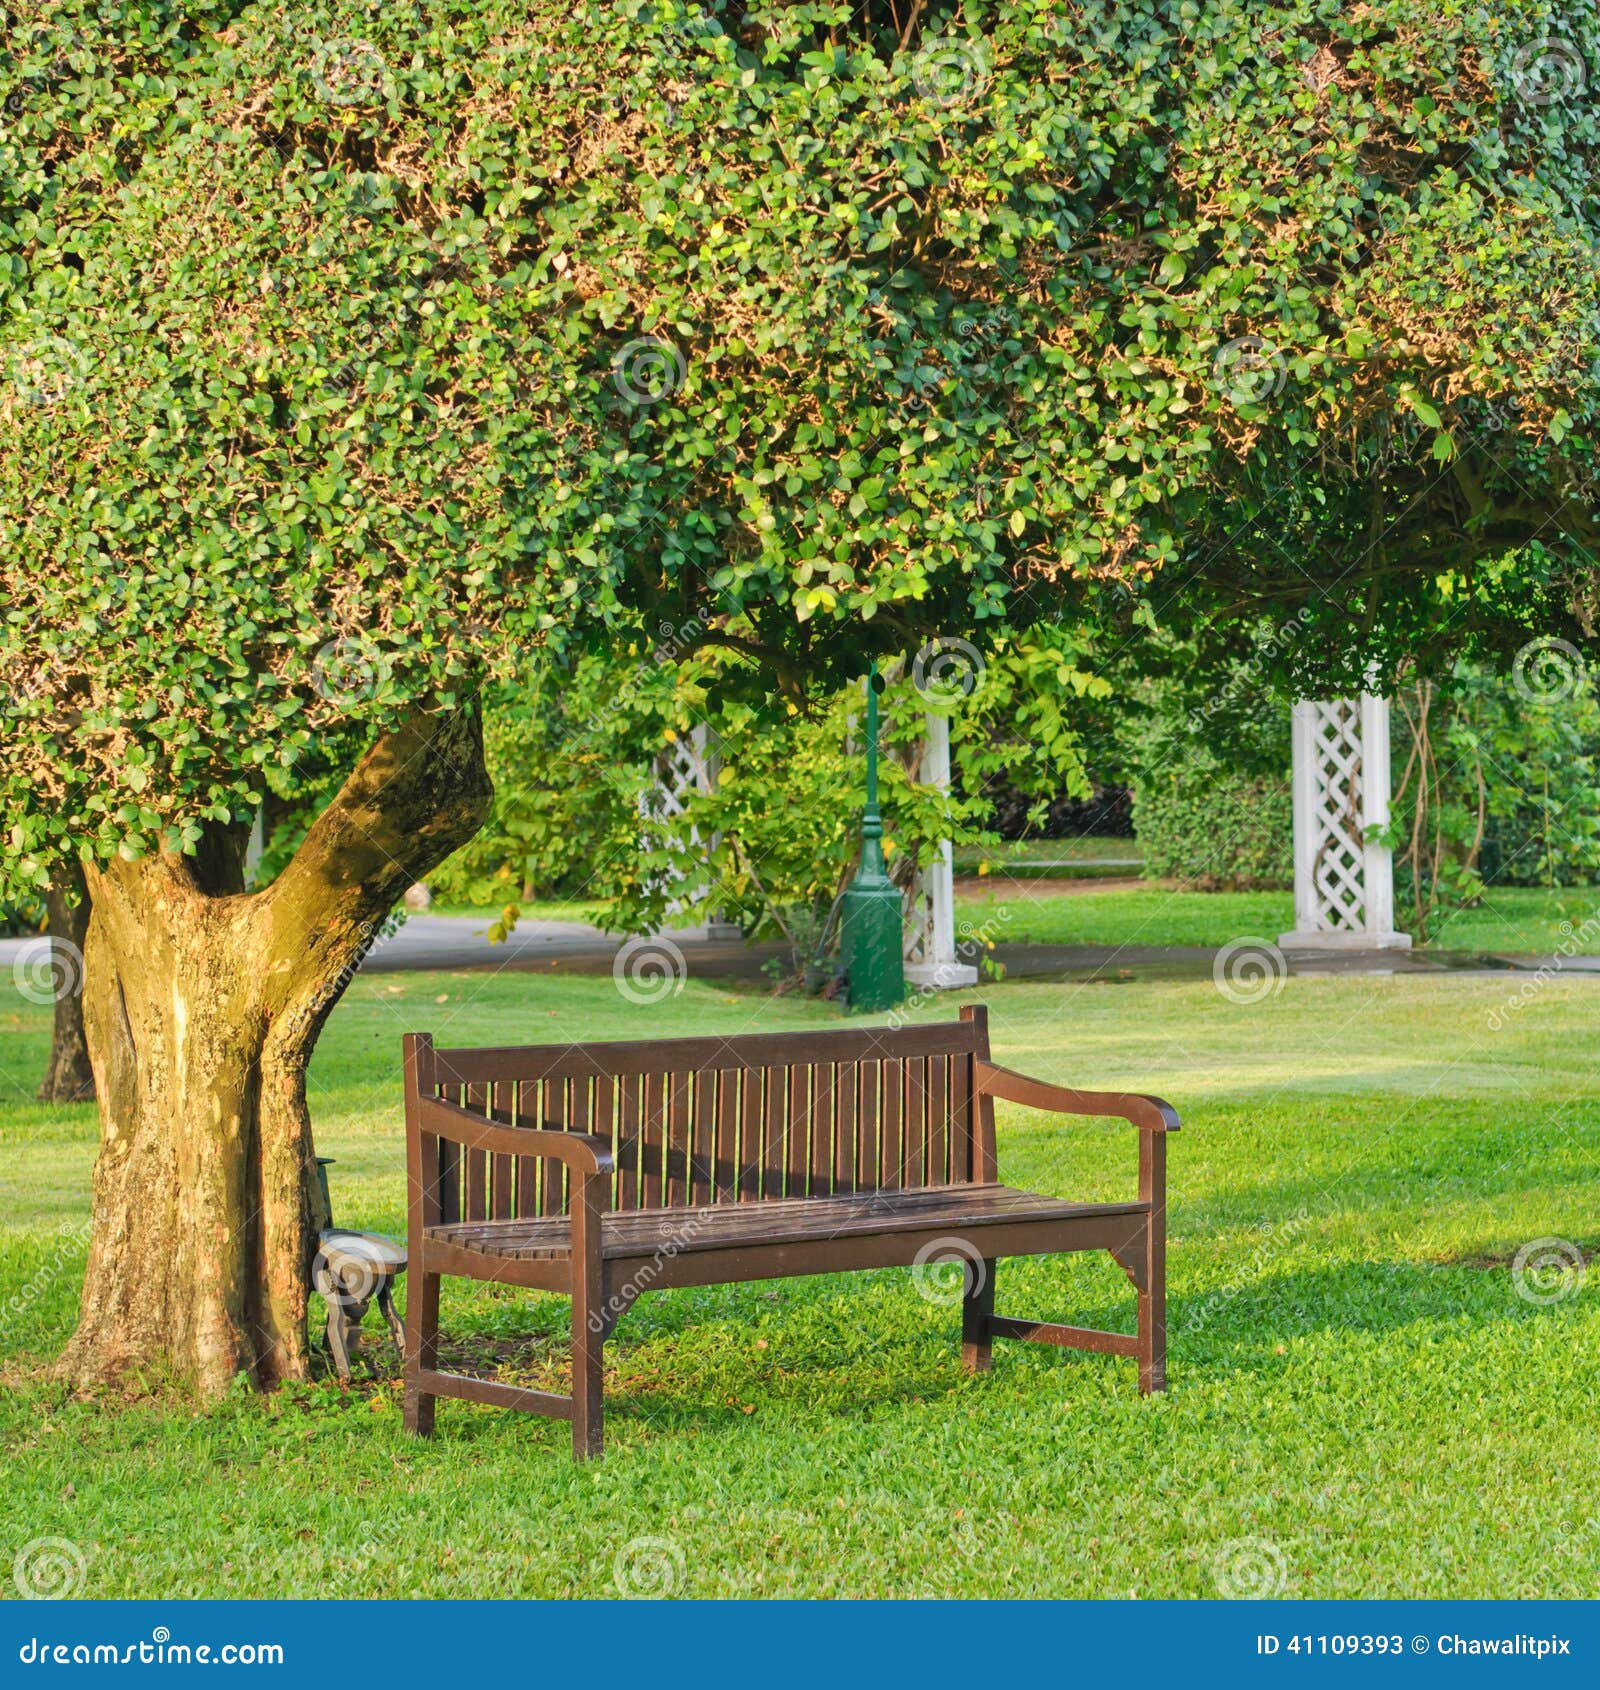 Chair Under The Tree Stock Photo - Image: 41109393